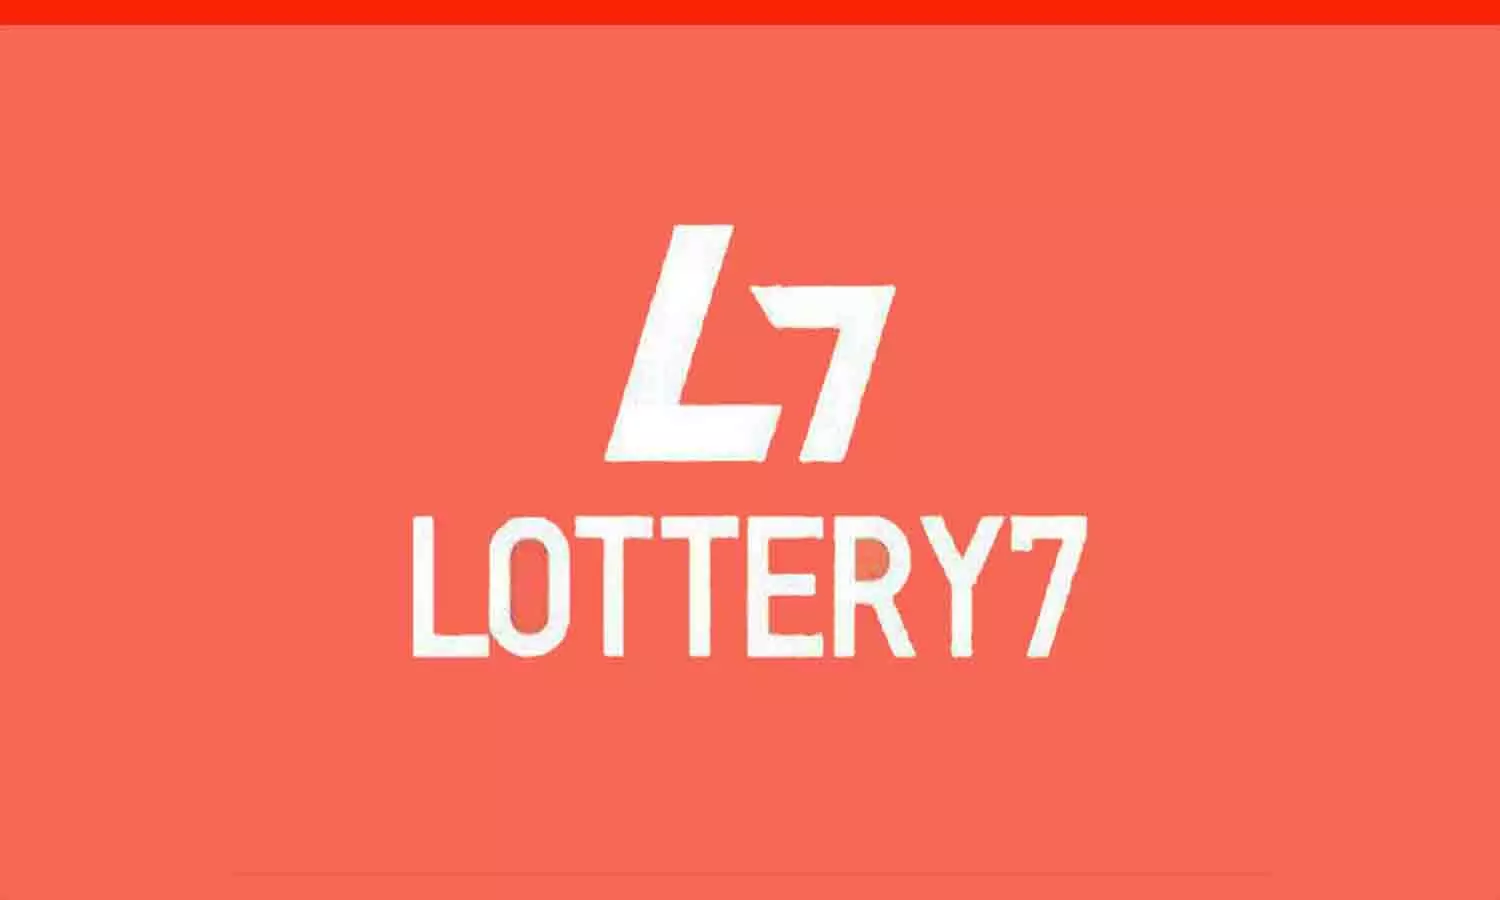 Lottery7 App Download | Sign Up & Earn Rewards In App